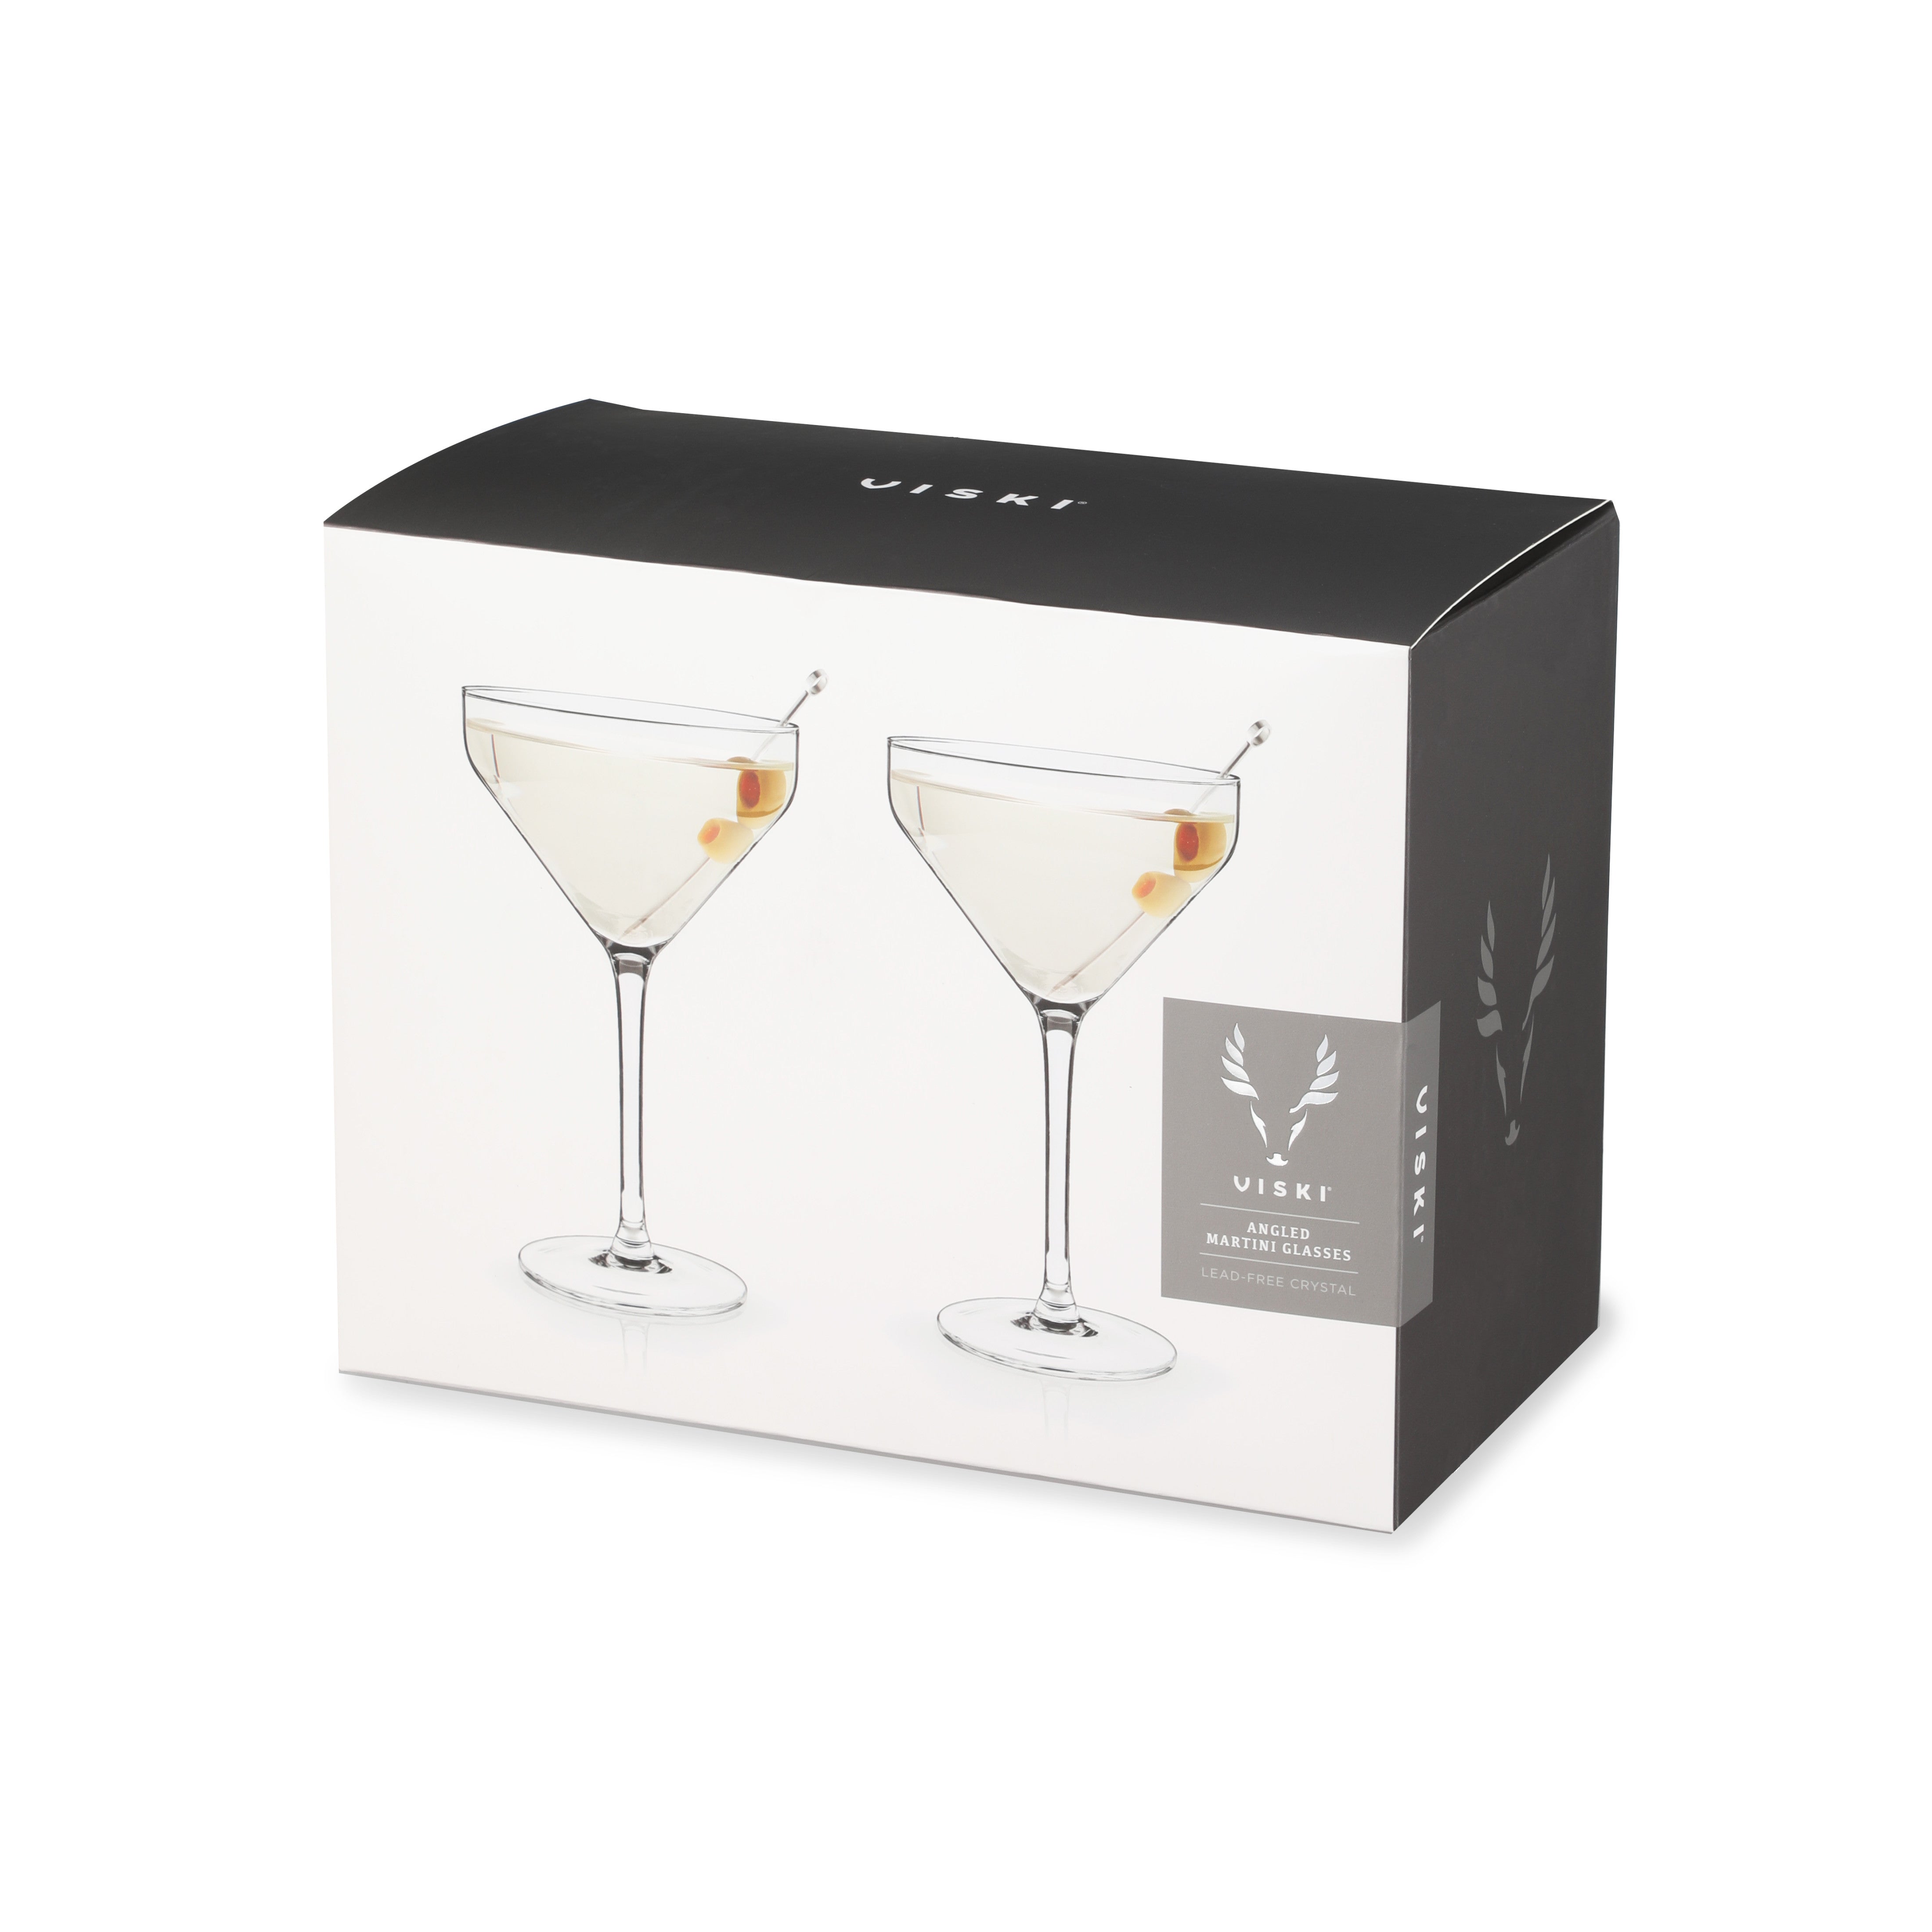 Coupe Cocktail Glass | Set of 2 | 8 oz | Hand-Blown Crystal Martini Glasses